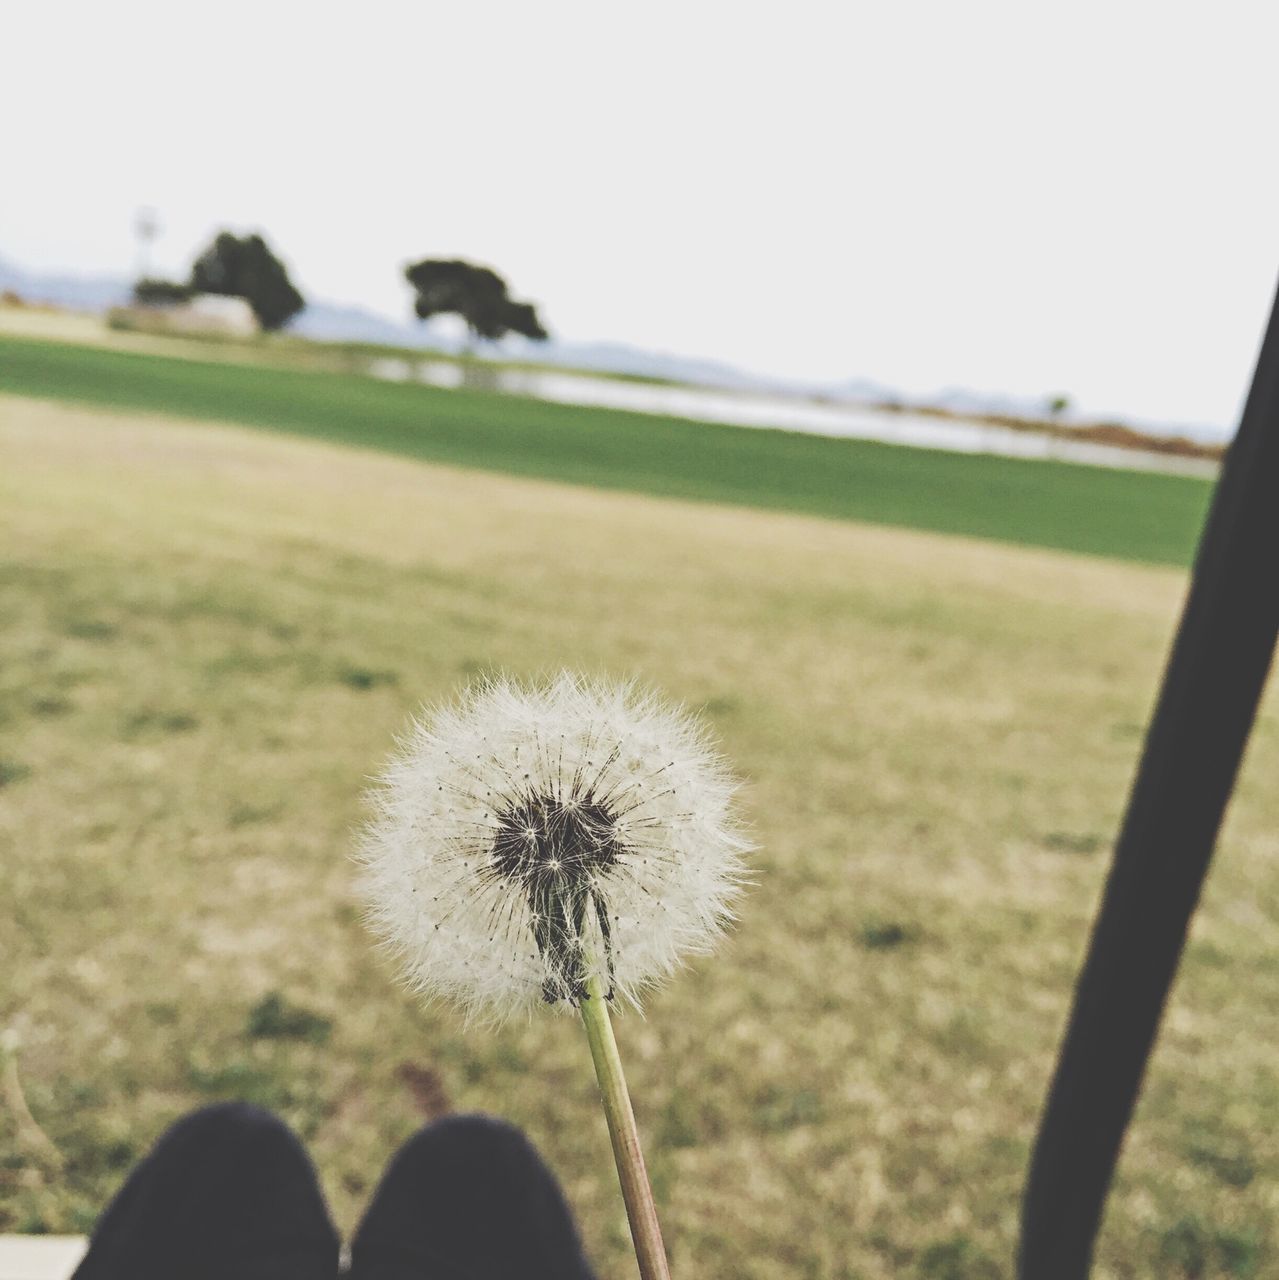 dandelion, flower, fragility, growth, freshness, field, focus on foreground, flower head, beauty in nature, stem, nature, wildflower, close-up, uncultivated, plant, landscape, single flower, softness, sky, white color